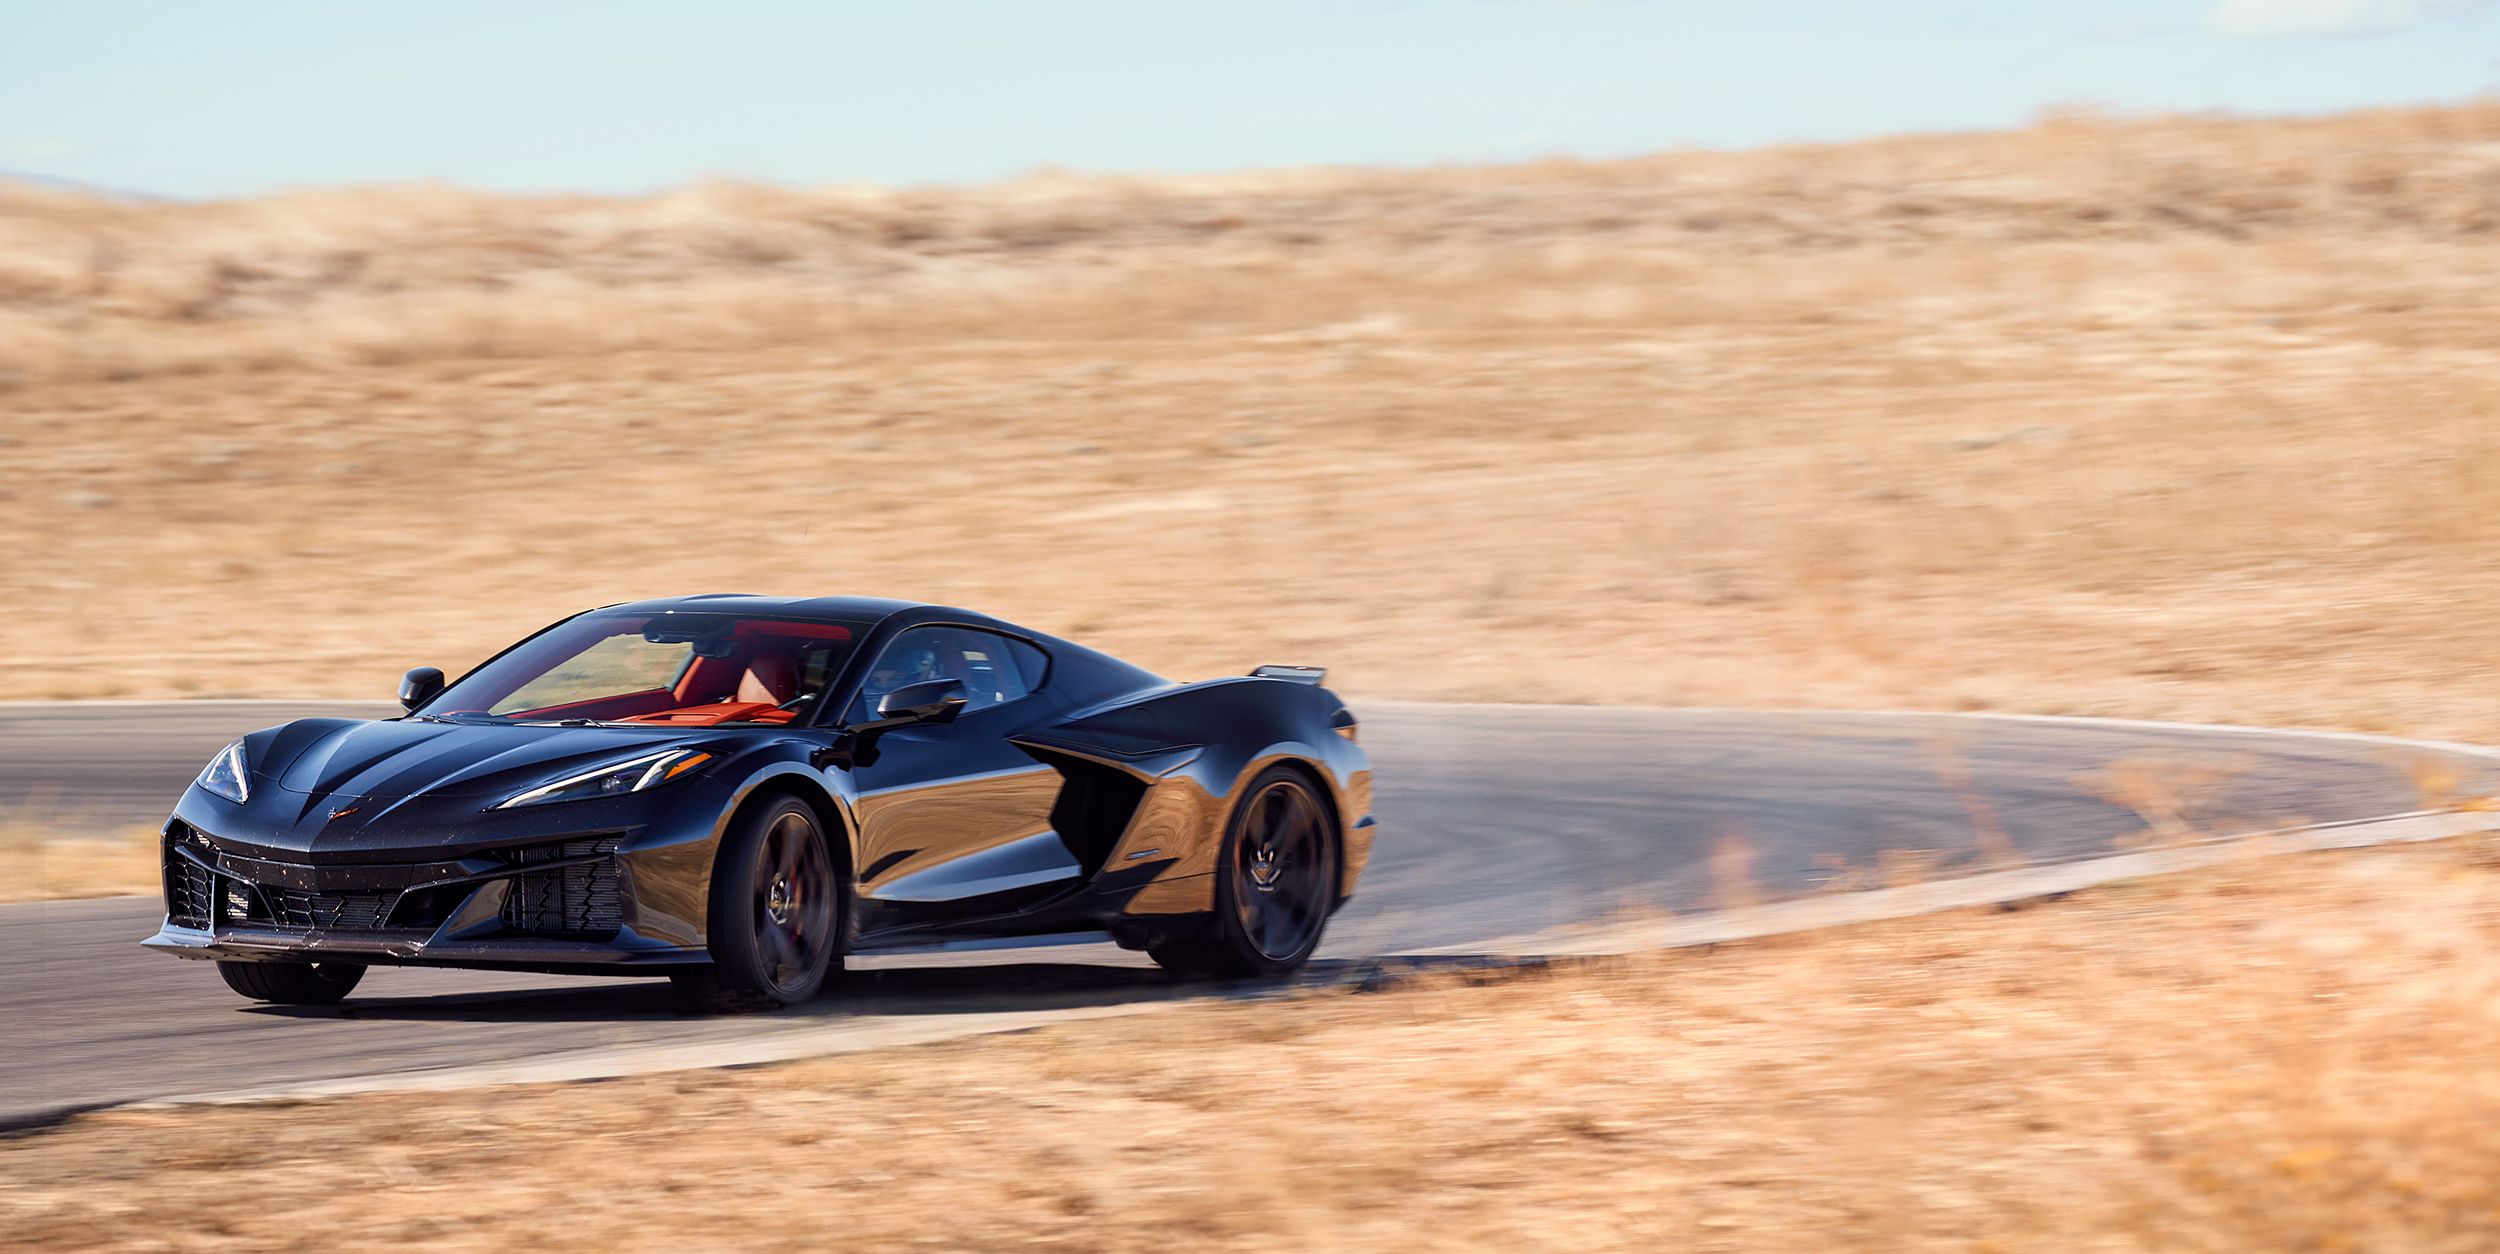 Hot Lapping the 2024 Corvette E-Ray on a Race Track